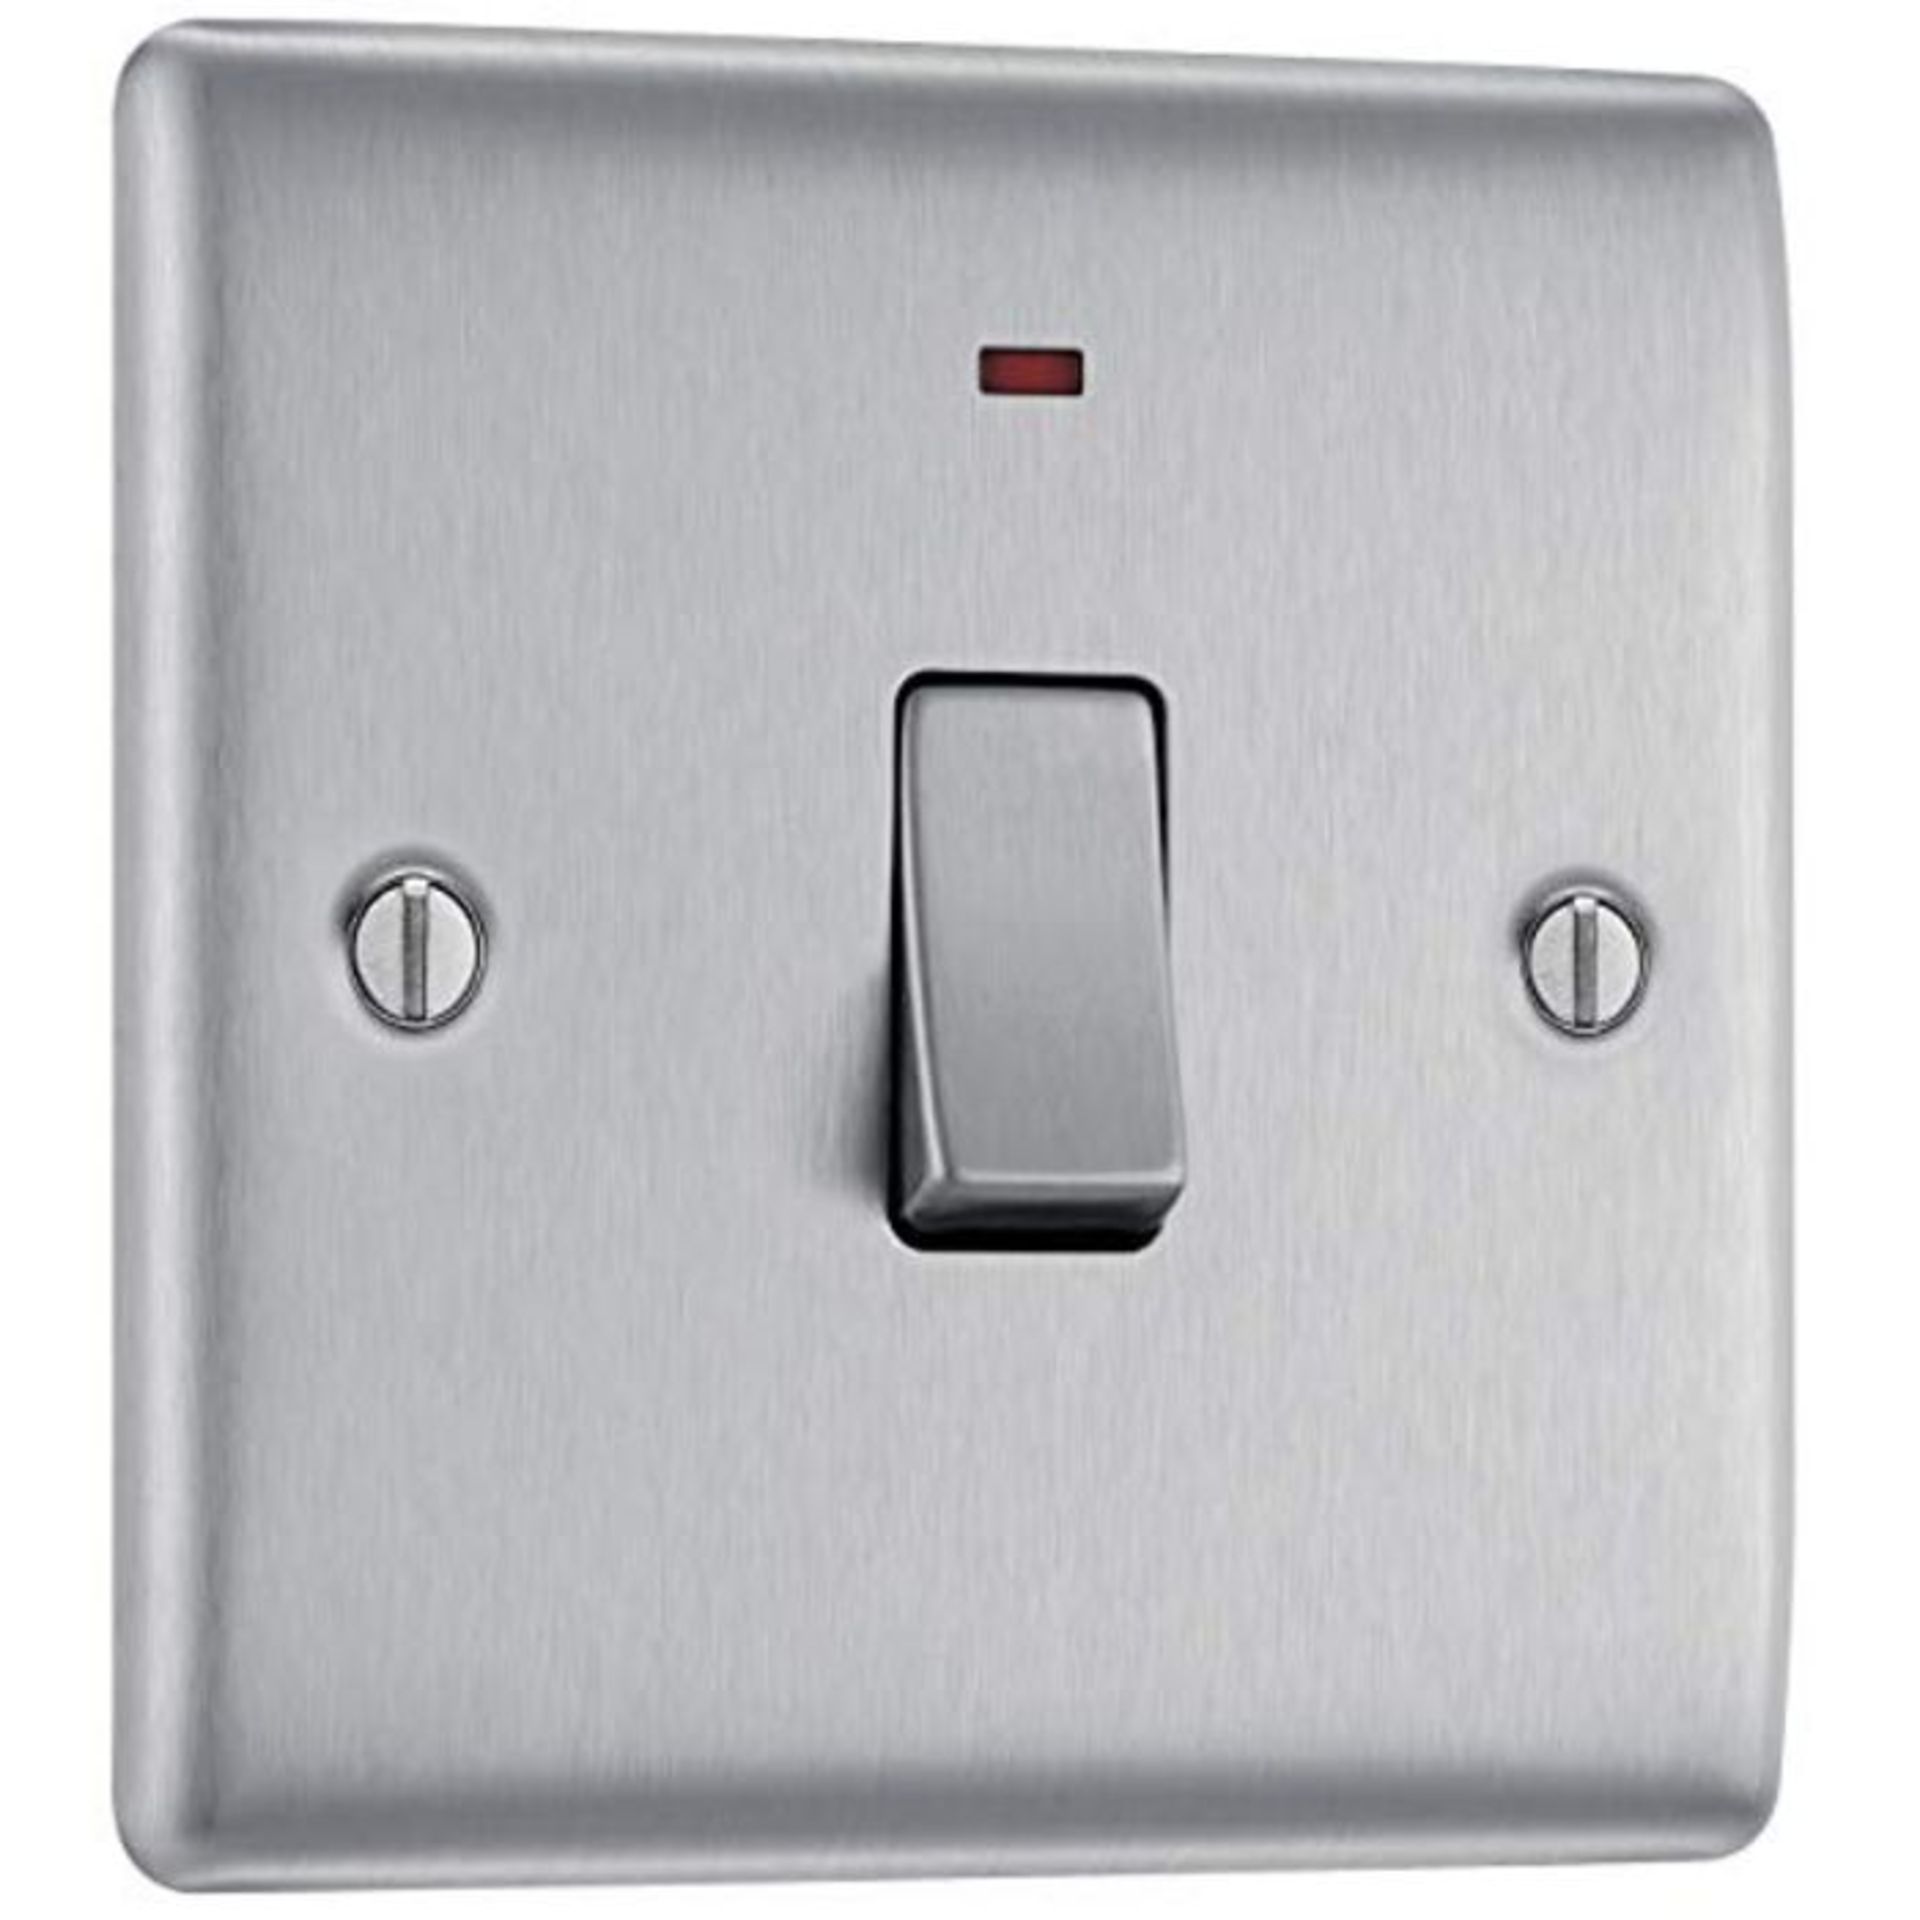 BG Electrical Single Light Switch with Power Indicator, Brushed Steel, 2-Way, 10AX